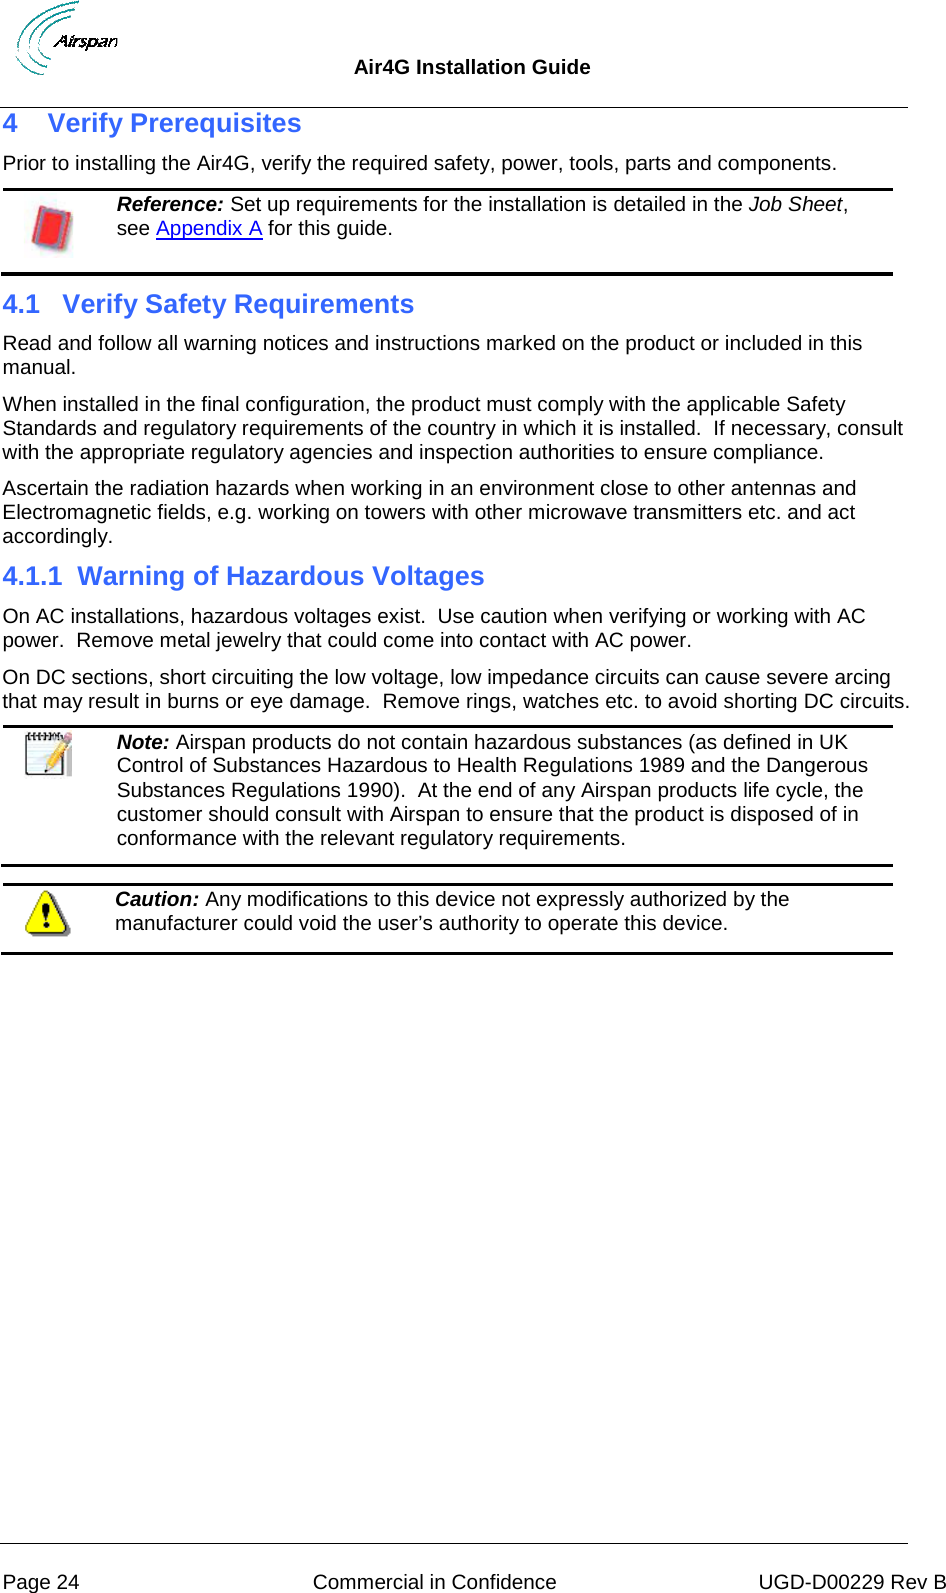  Air4G Installation Guide     Page 24 Commercial in Confidence UGD-D00229 Rev B 4  Verify Prerequisites Prior to installing the Air4G, verify the required safety, power, tools, parts and components.  Reference: Set up requirements for the installation is detailed in the Job Sheet, see Appendix A for this guide. 4.1  Verify Safety Requirements Read and follow all warning notices and instructions marked on the product or included in this manual. When installed in the final configuration, the product must comply with the applicable Safety Standards and regulatory requirements of the country in which it is installed.  If necessary, consult with the appropriate regulatory agencies and inspection authorities to ensure compliance. Ascertain the radiation hazards when working in an environment close to other antennas and Electromagnetic fields, e.g. working on towers with other microwave transmitters etc. and act accordingly. 4.1.1 Warning of Hazardous Voltages On AC installations, hazardous voltages exist.  Use caution when verifying or working with AC power.  Remove metal jewelry that could come into contact with AC power. On DC sections, short circuiting the low voltage, low impedance circuits can cause severe arcing that may result in burns or eye damage.  Remove rings, watches etc. to avoid shorting DC circuits.   Note: Airspan products do not contain hazardous substances (as defined in UK Control of Substances Hazardous to Health Regulations 1989 and the Dangerous Substances Regulations 1990).  At the end of any Airspan products life cycle, the customer should consult with Airspan to ensure that the product is disposed of in conformance with the relevant regulatory requirements.   Caution: Any modifications to this device not expressly authorized by the manufacturer could void the user’s authority to operate this device.  